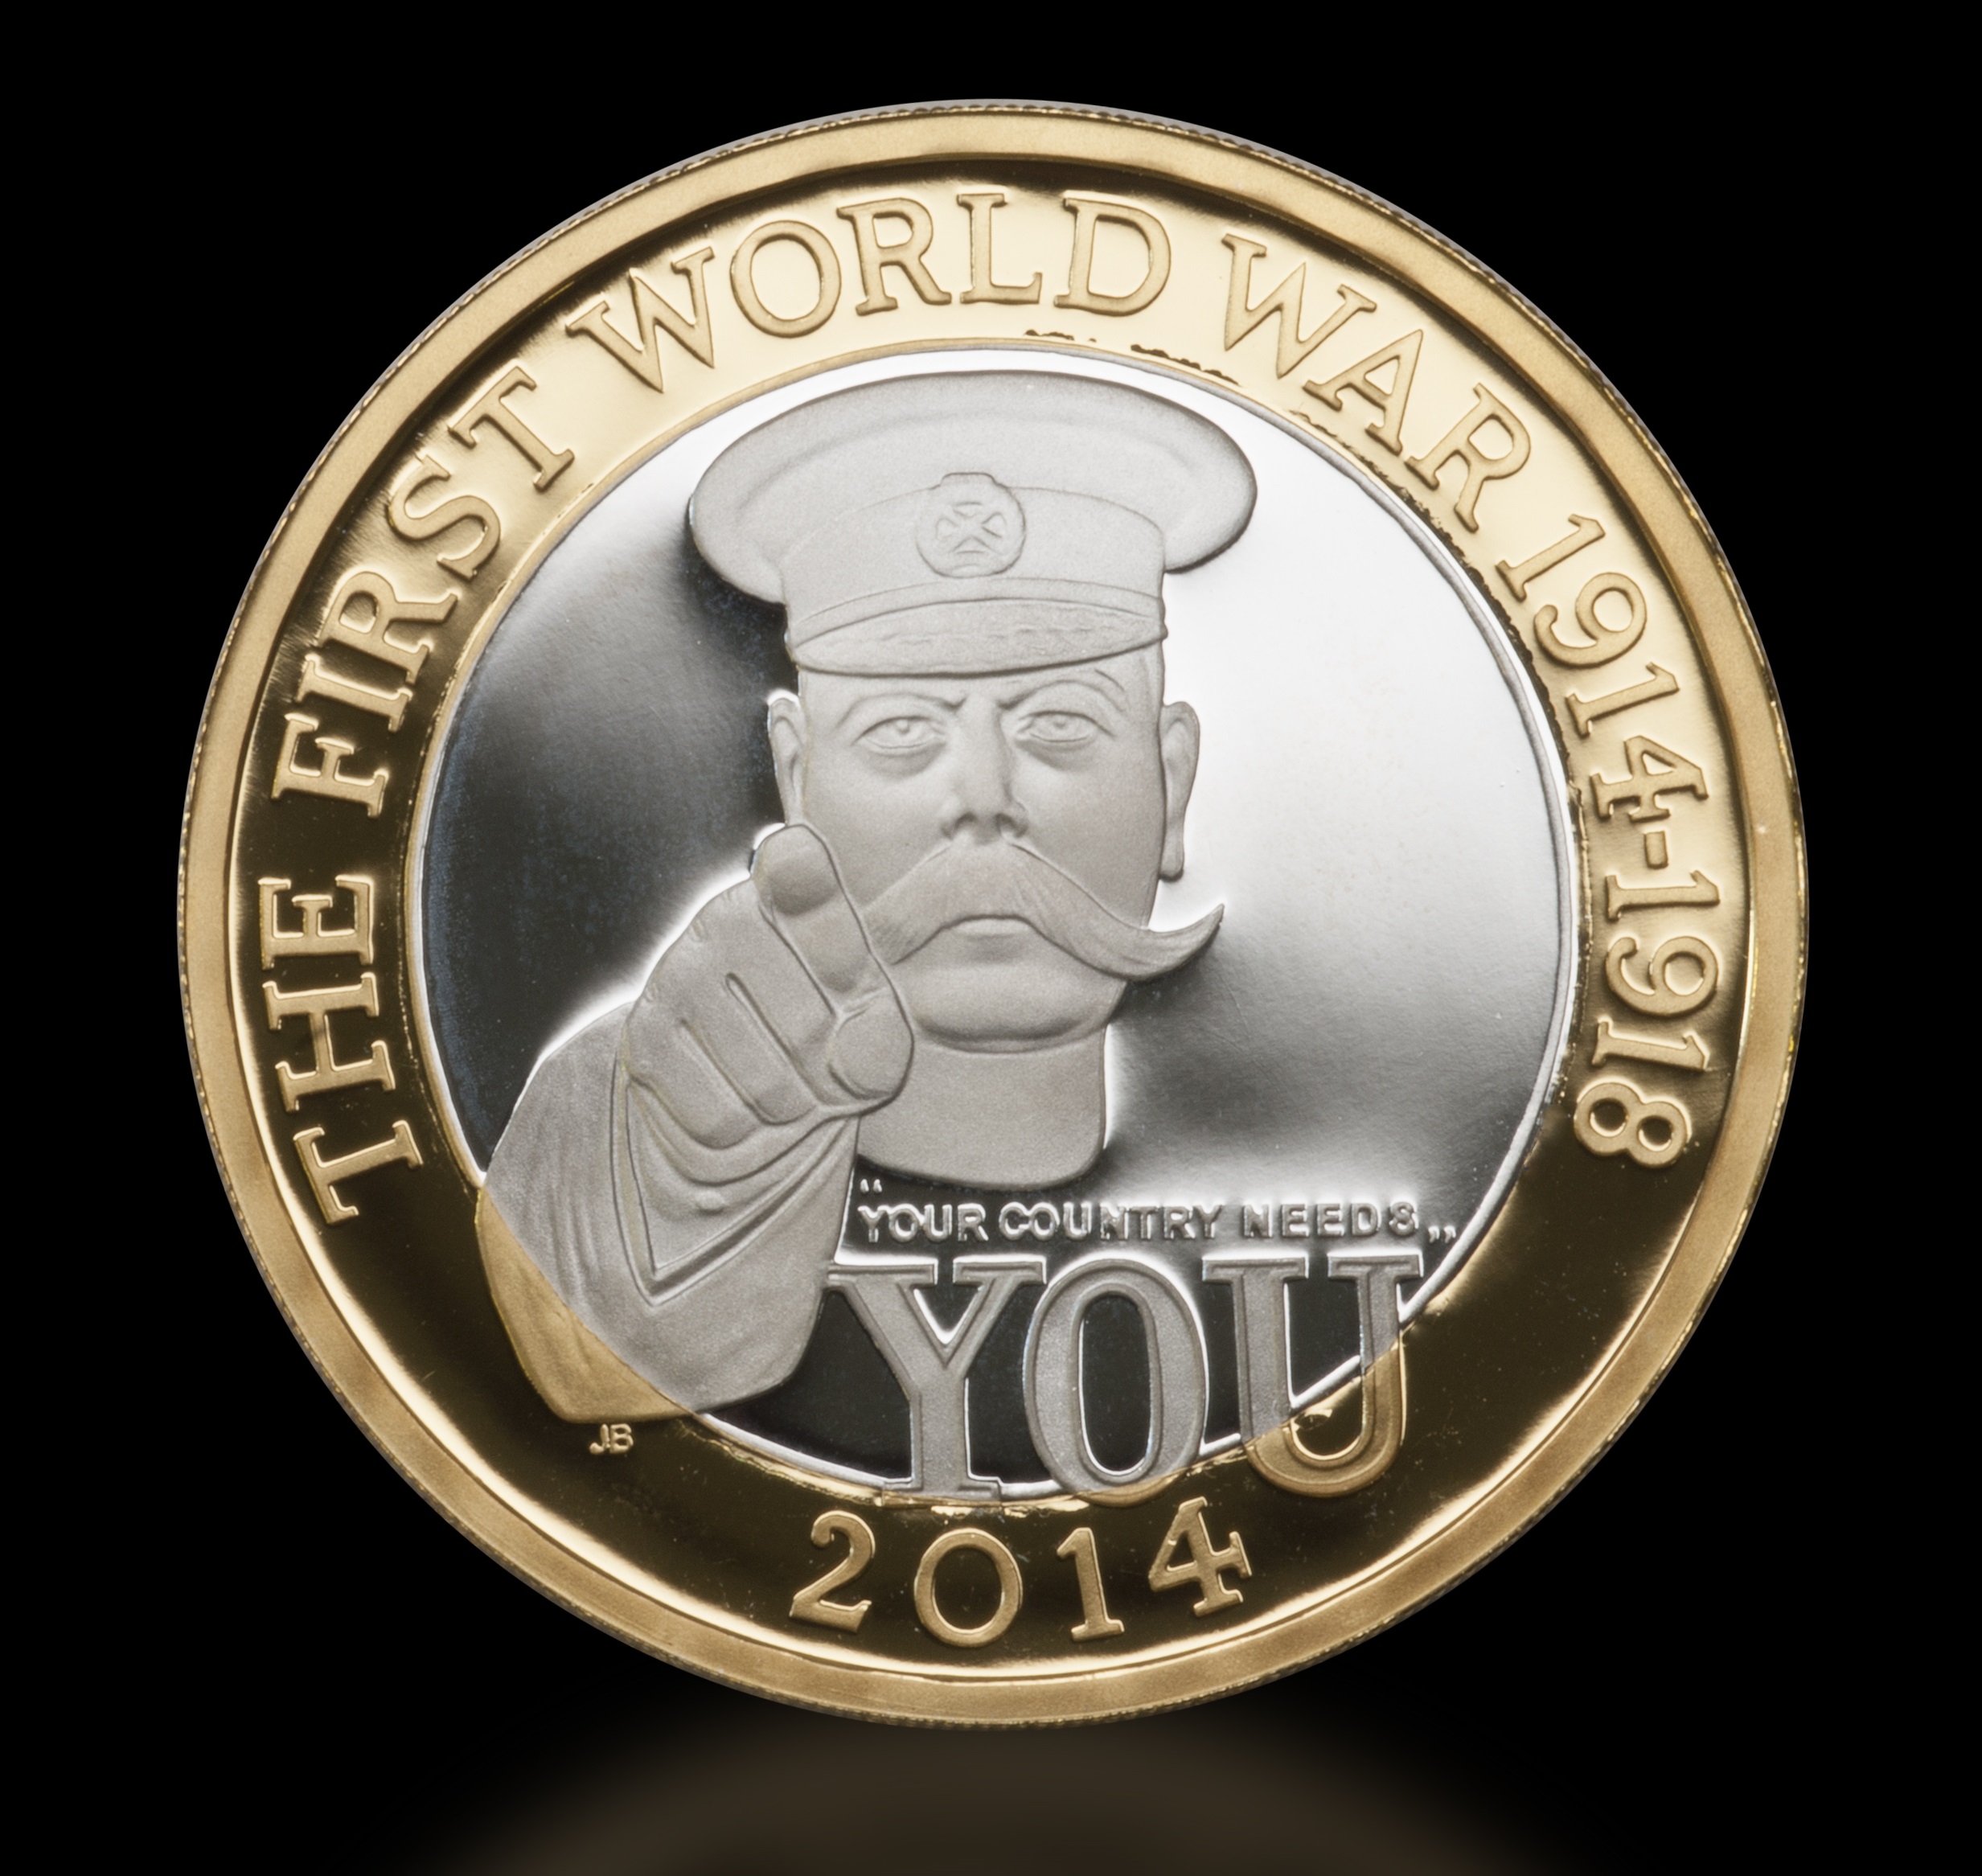 The new First World War £2 features Lord Kitchener's famous pose